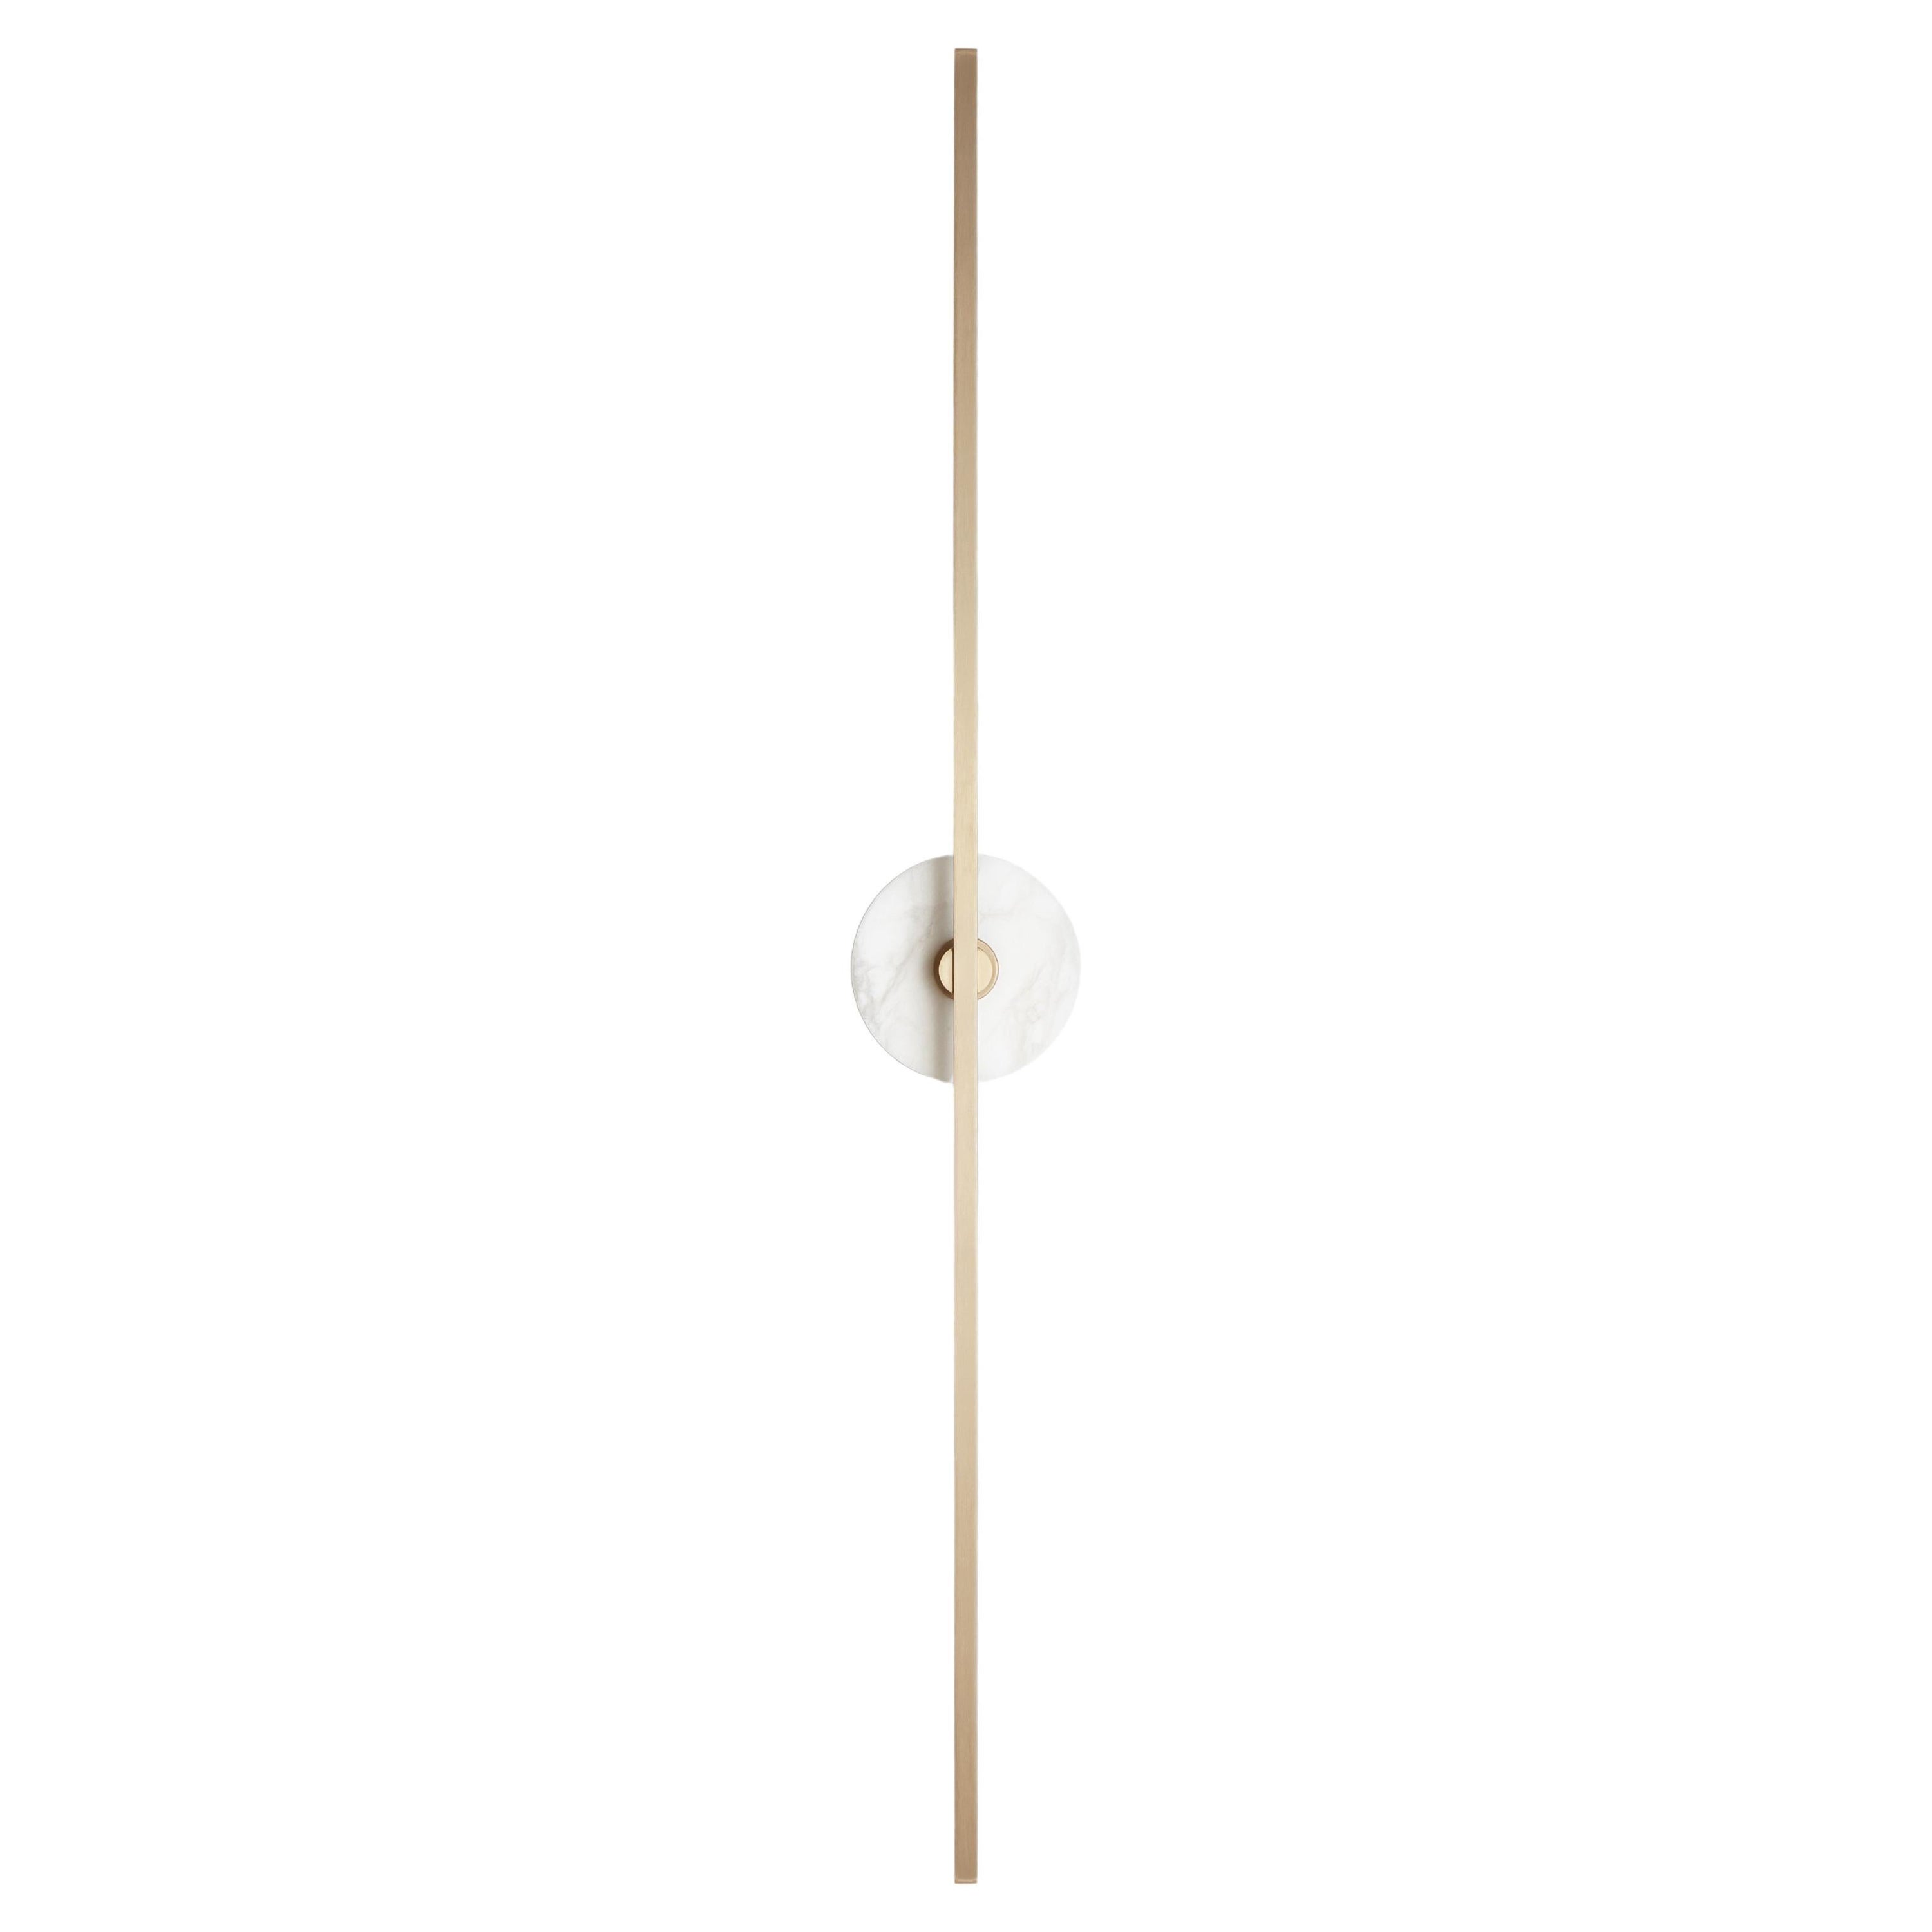 Essential Italian Wall Sconce " Grand Stick", Brass and Alabaster